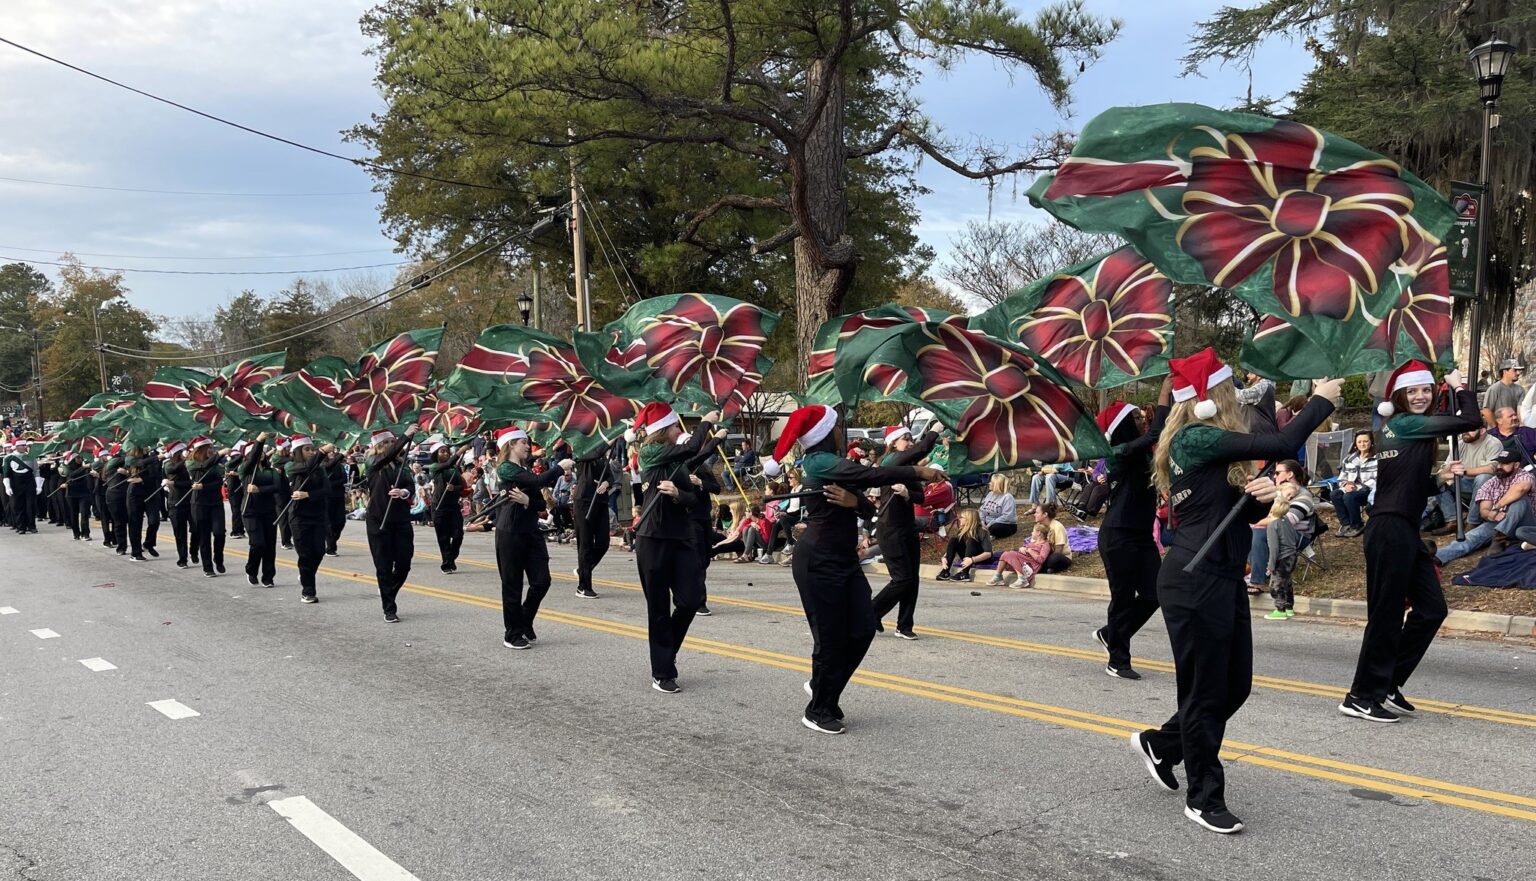 Lexington Christmas Parade is Sunday, resulting in road closings and